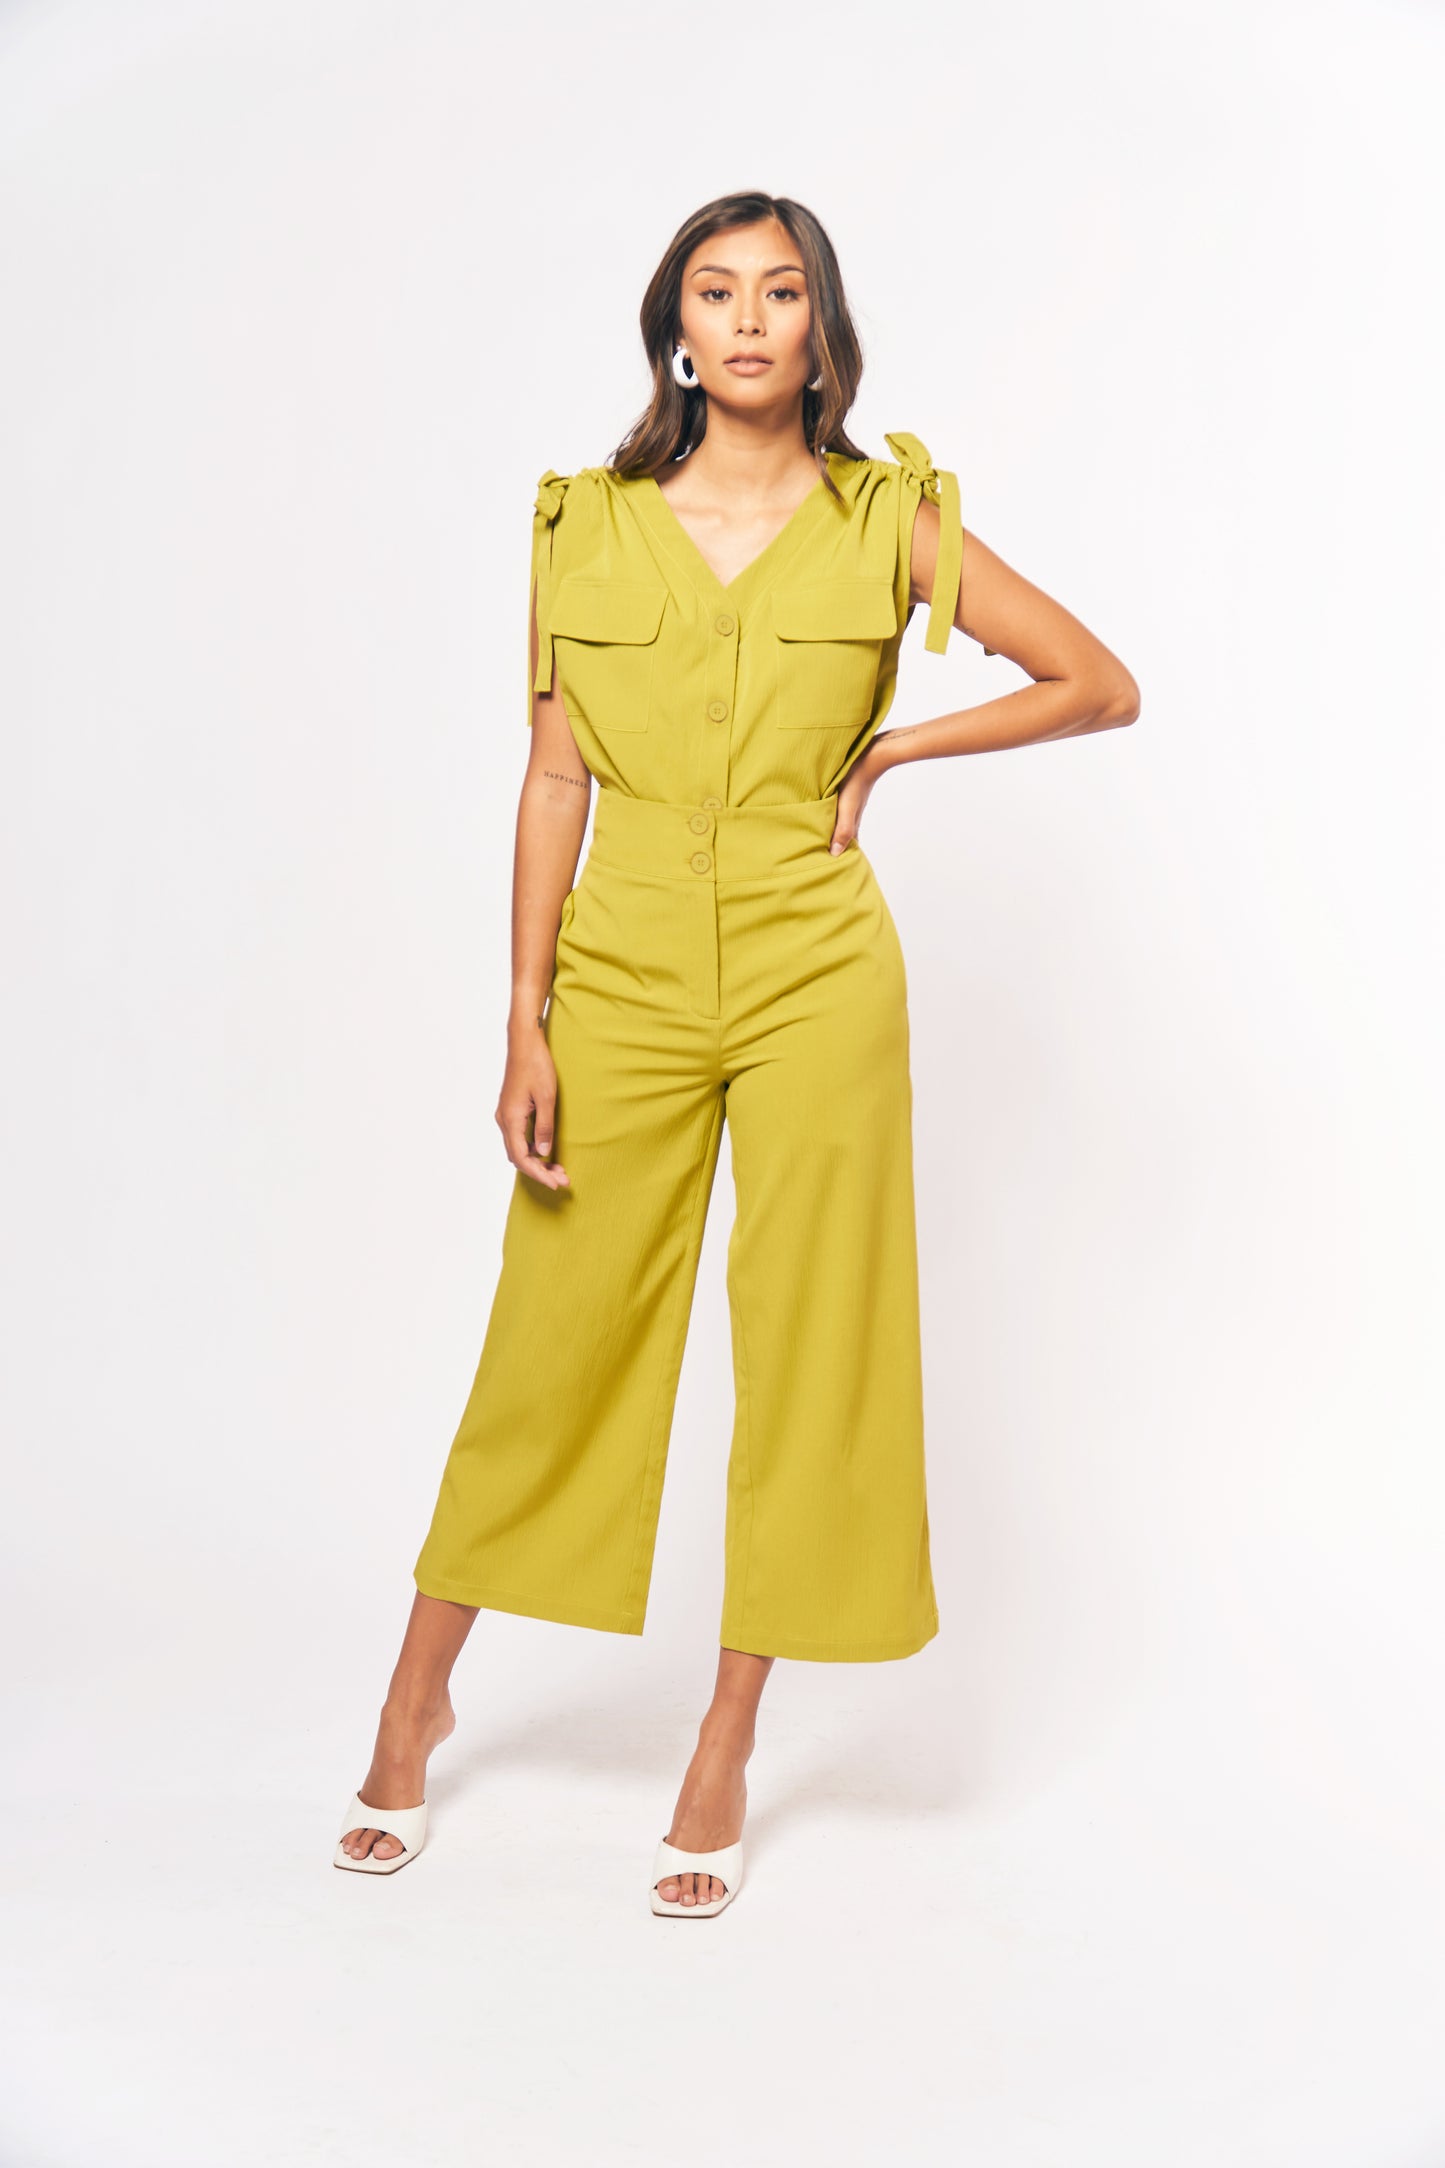 Complementary Candela Short Sleeve Top (Lime)